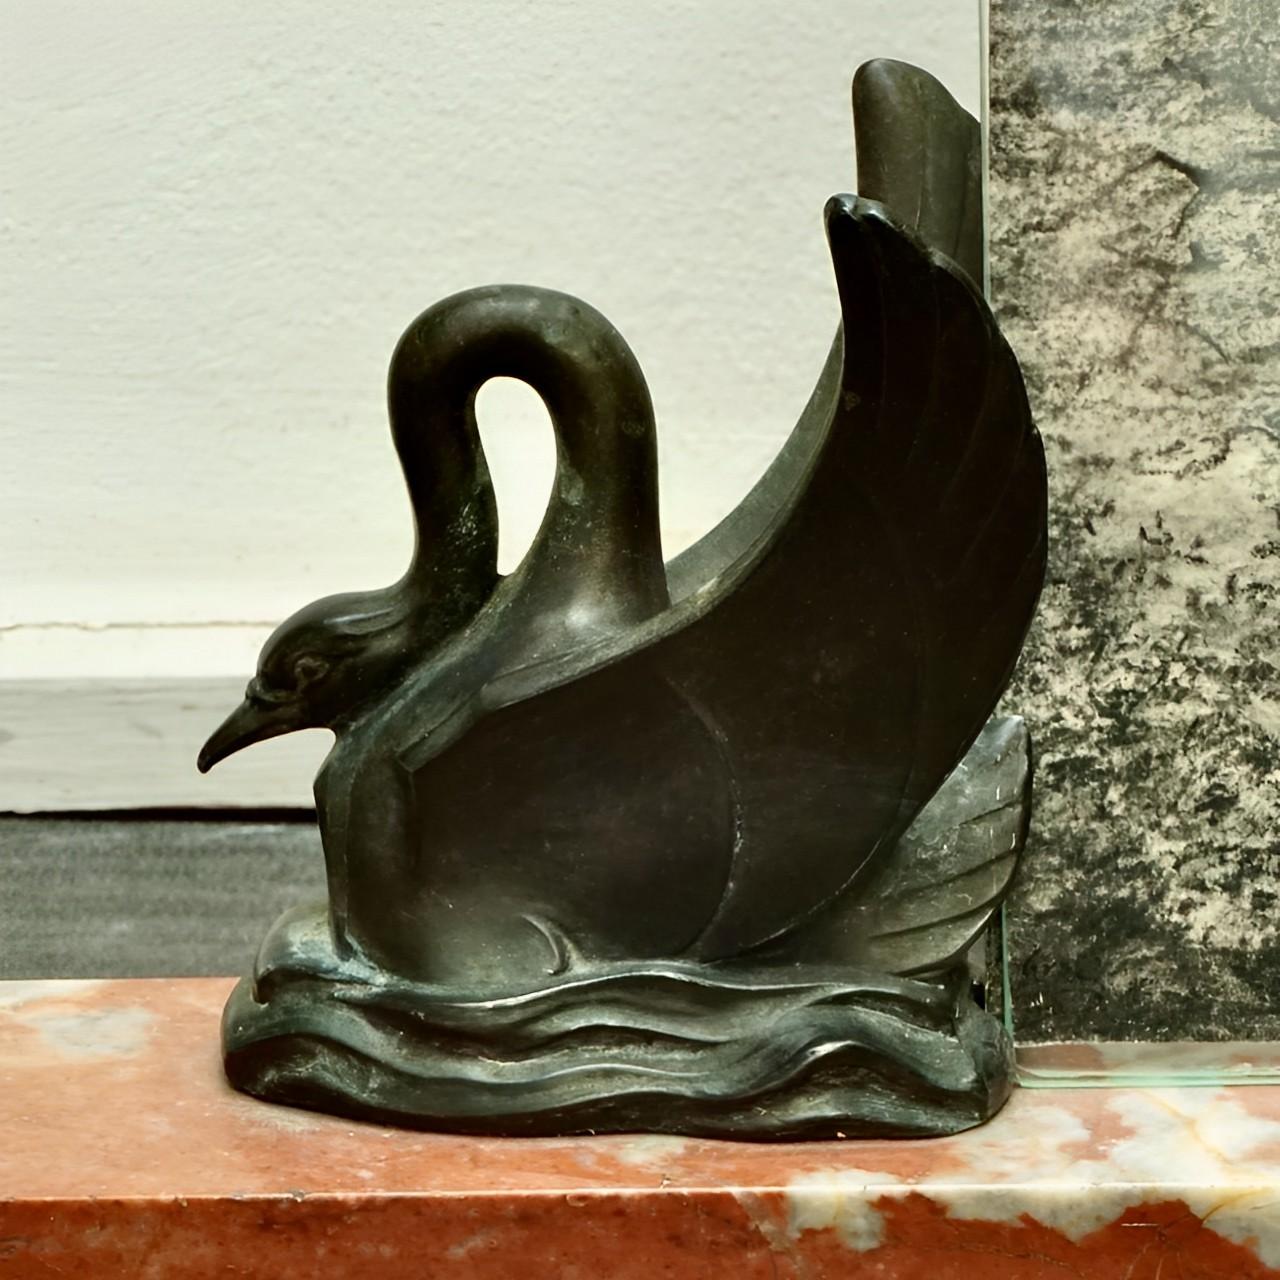 
Beautiful French Art Deco marble picture frame, with a pair of decorative swans. Measuring length 48 cm / 18.9 inches by width 7 cm / 2.75 inches, and height 22.5 cm / 8.85 inches. The metal swans have aged patina, one has a crack (see photo 5). We